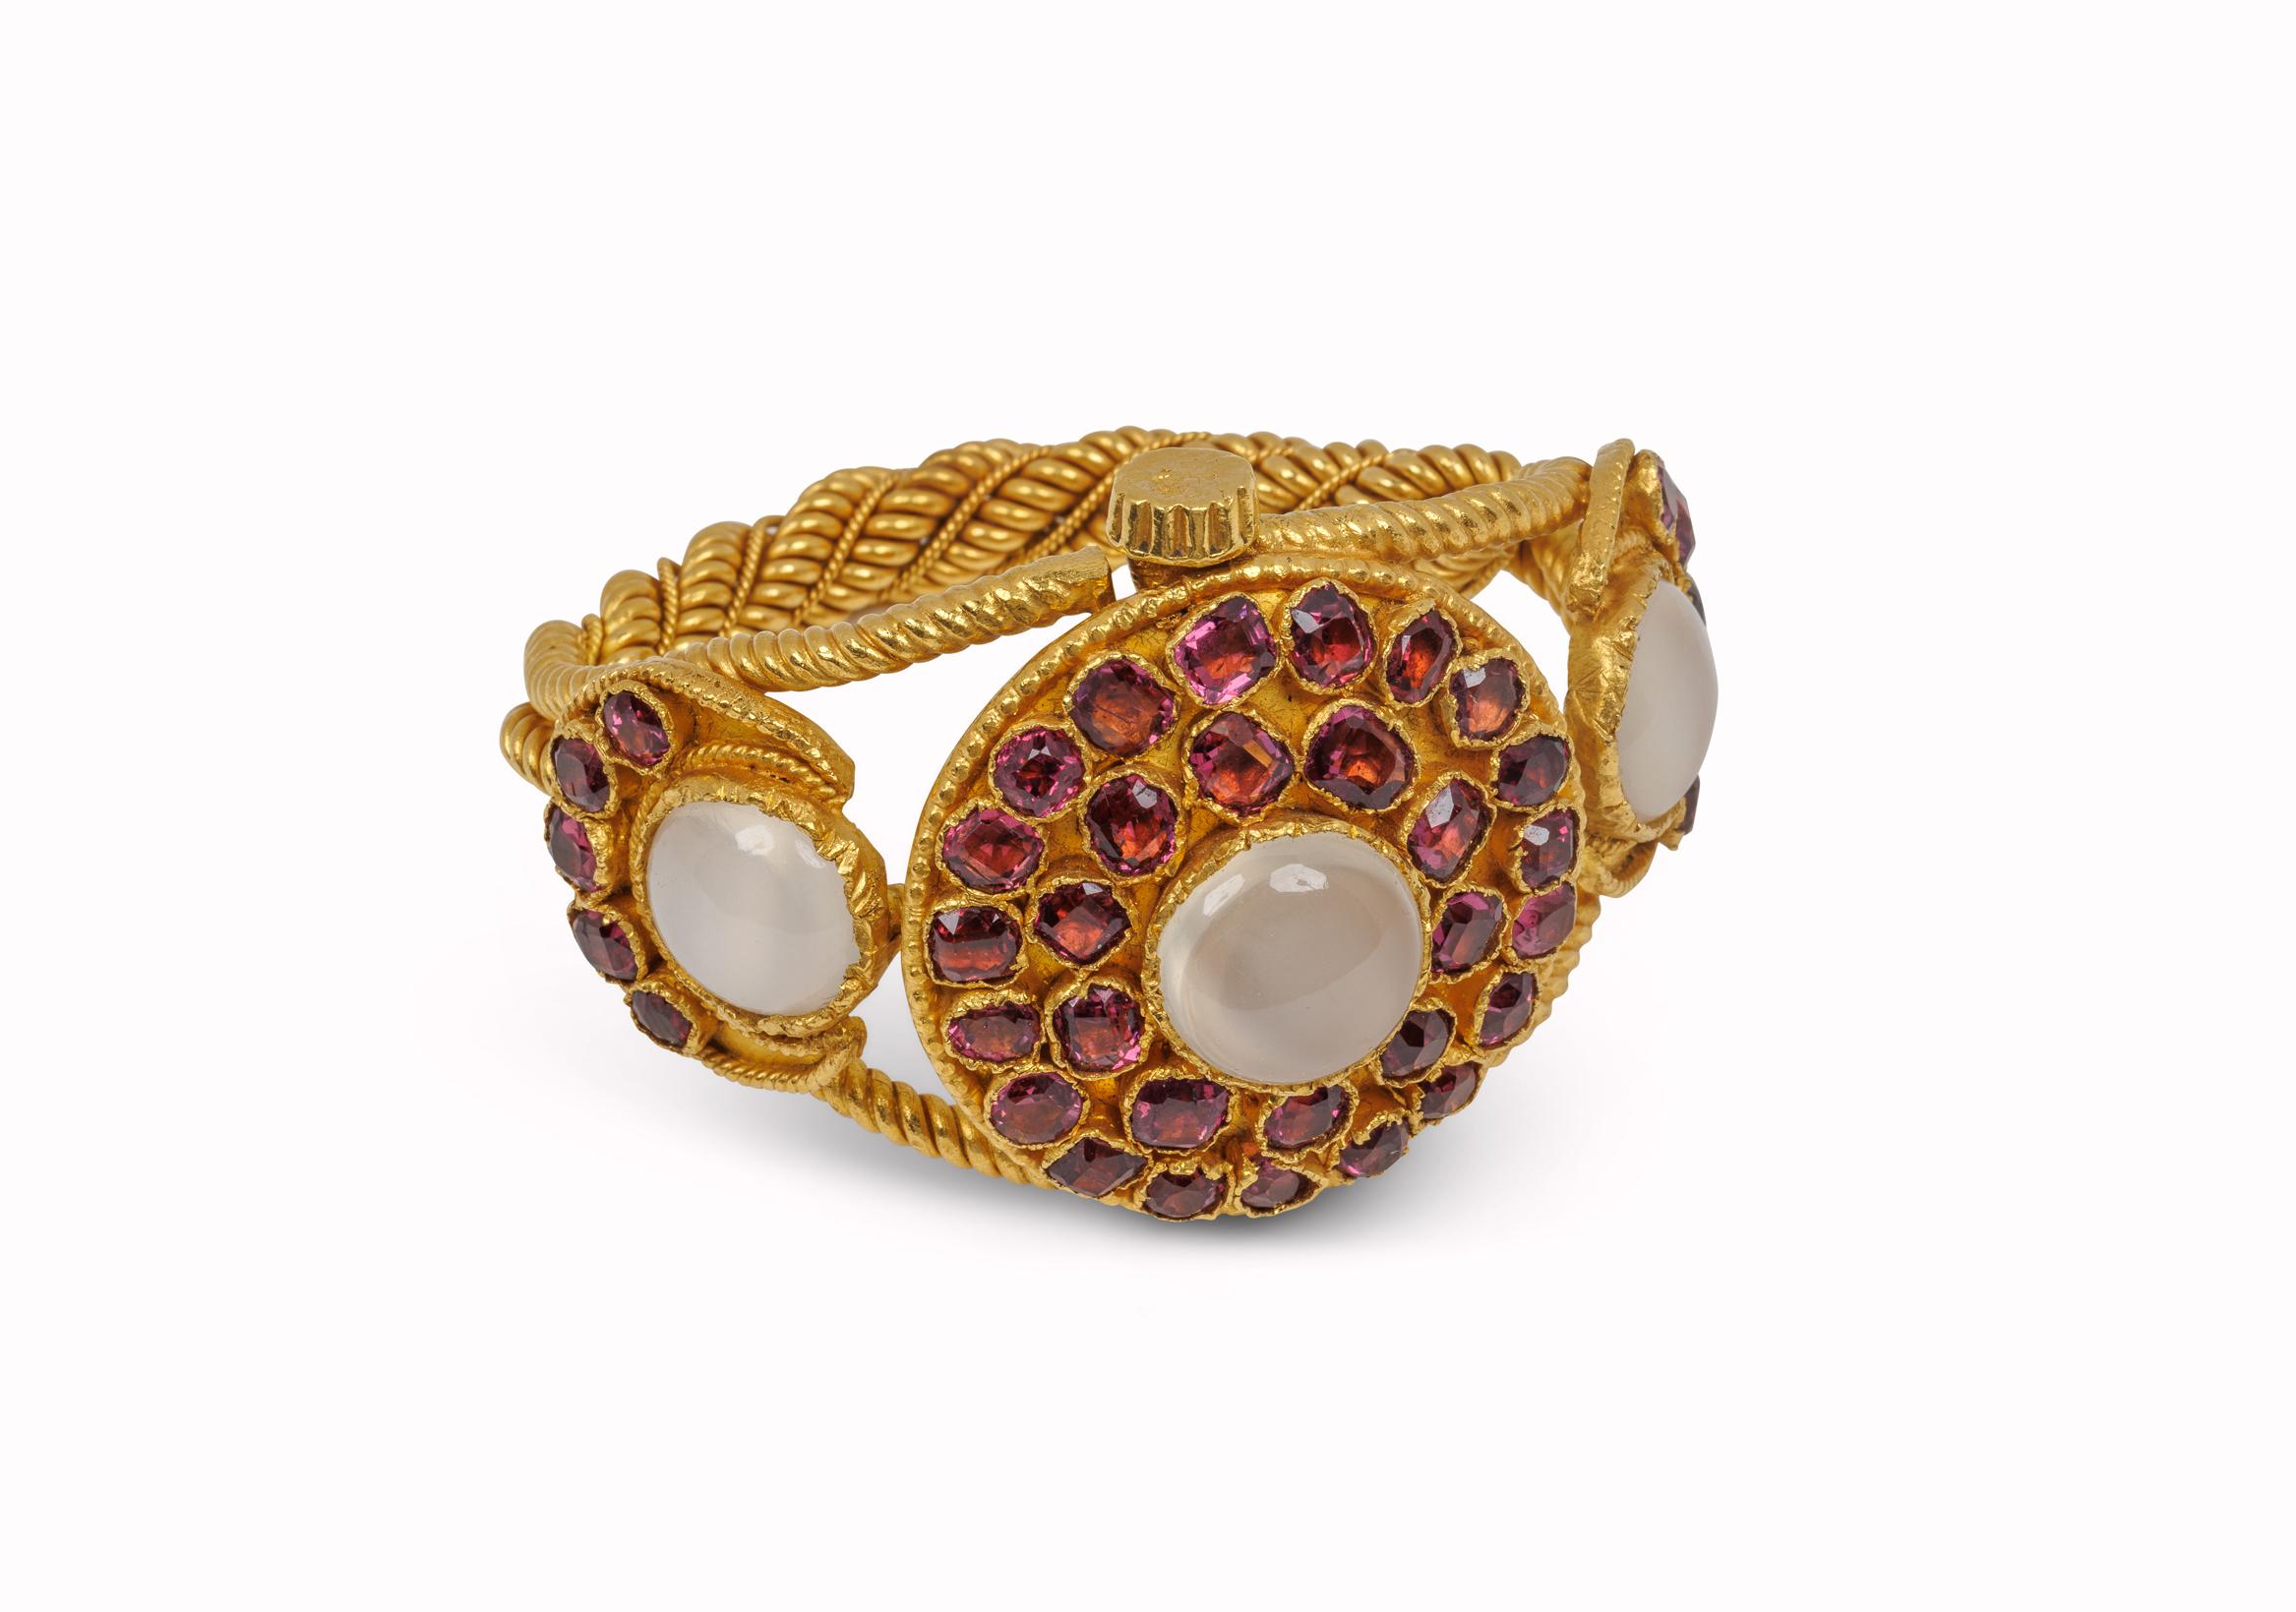 24k Yellow Gold Heavy Moonstone and Garnet Bangle Bracelet 
approximately 3 moonstones weight 34cts  
36cts garnets 